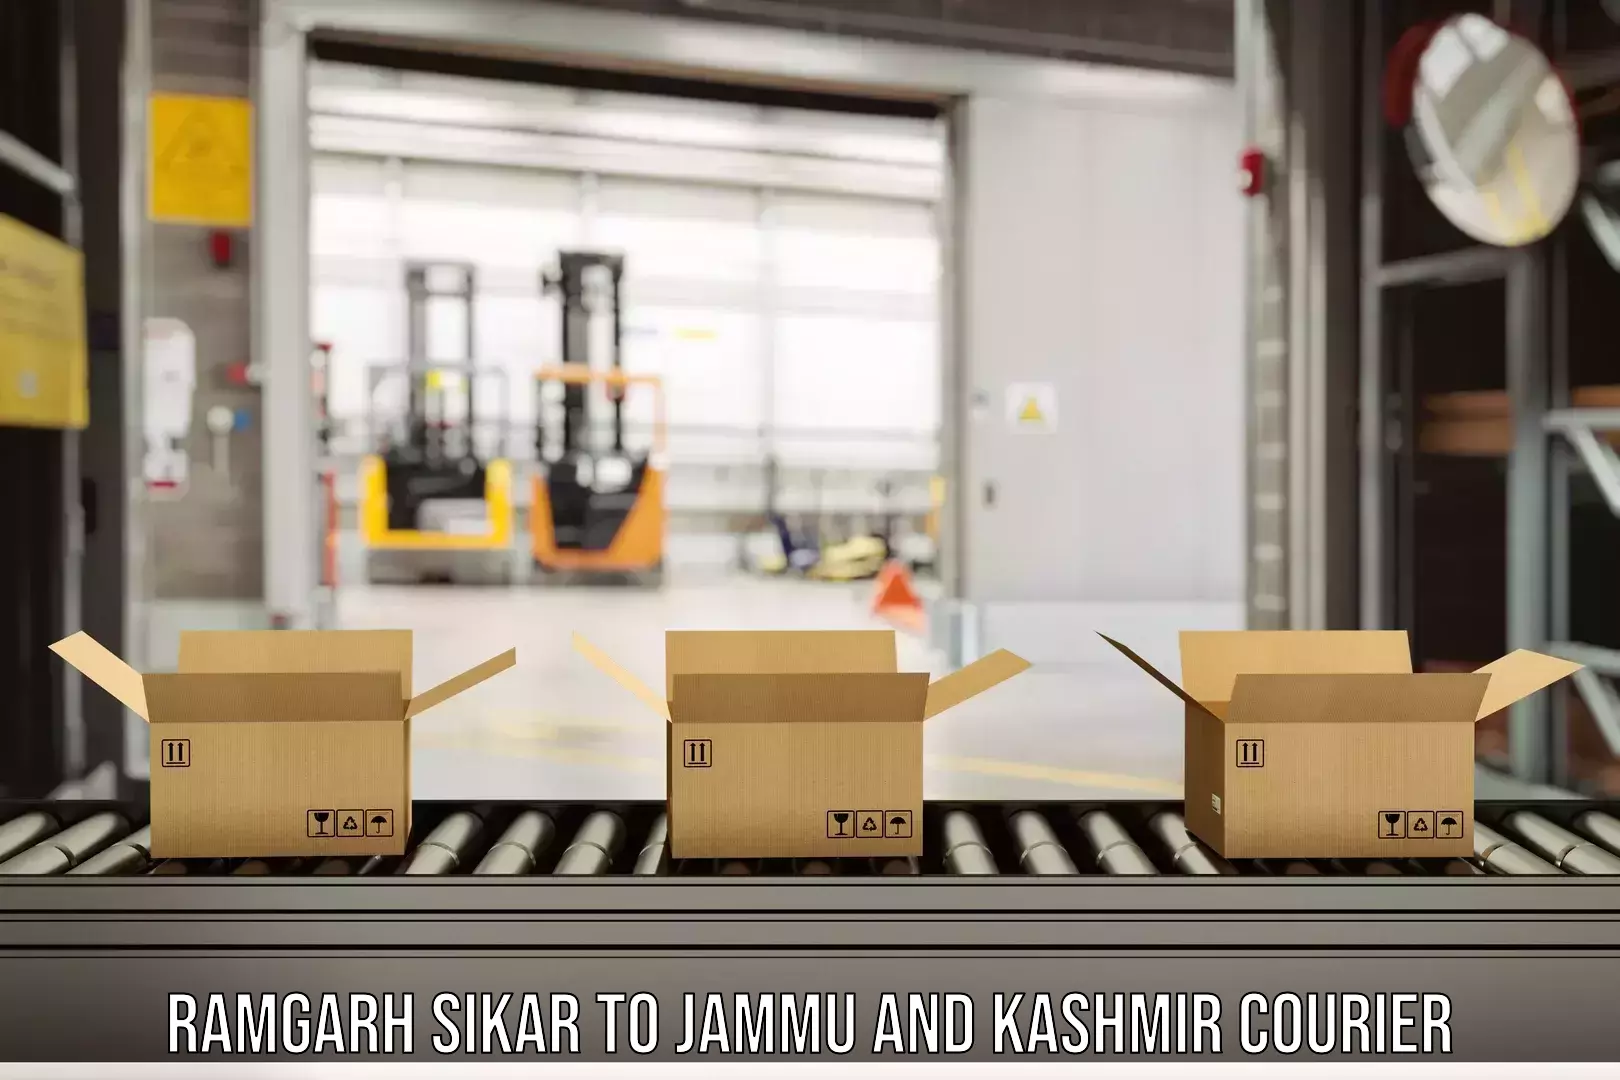 User-friendly delivery service Ramgarh Sikar to IIT Jammu